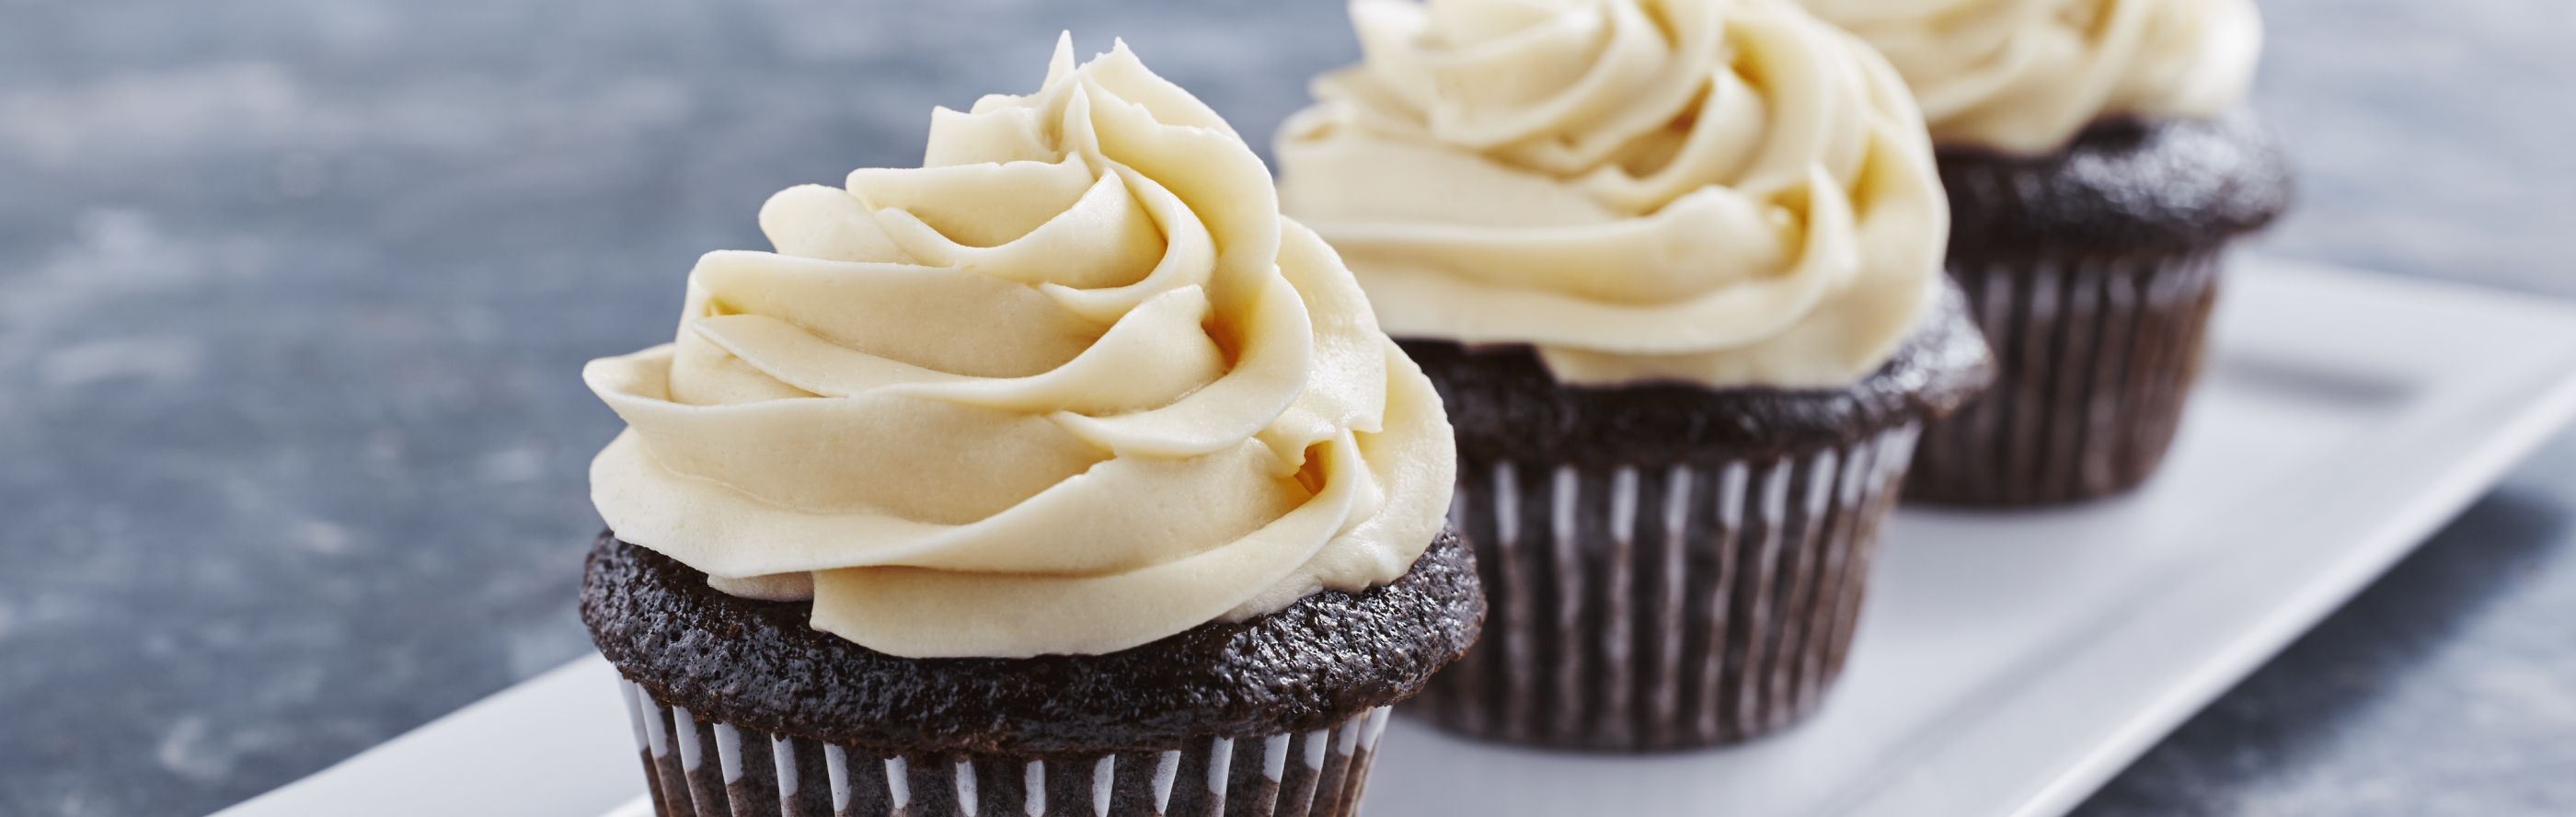 Three chocolate cupcakes topped with cream cheese frosting